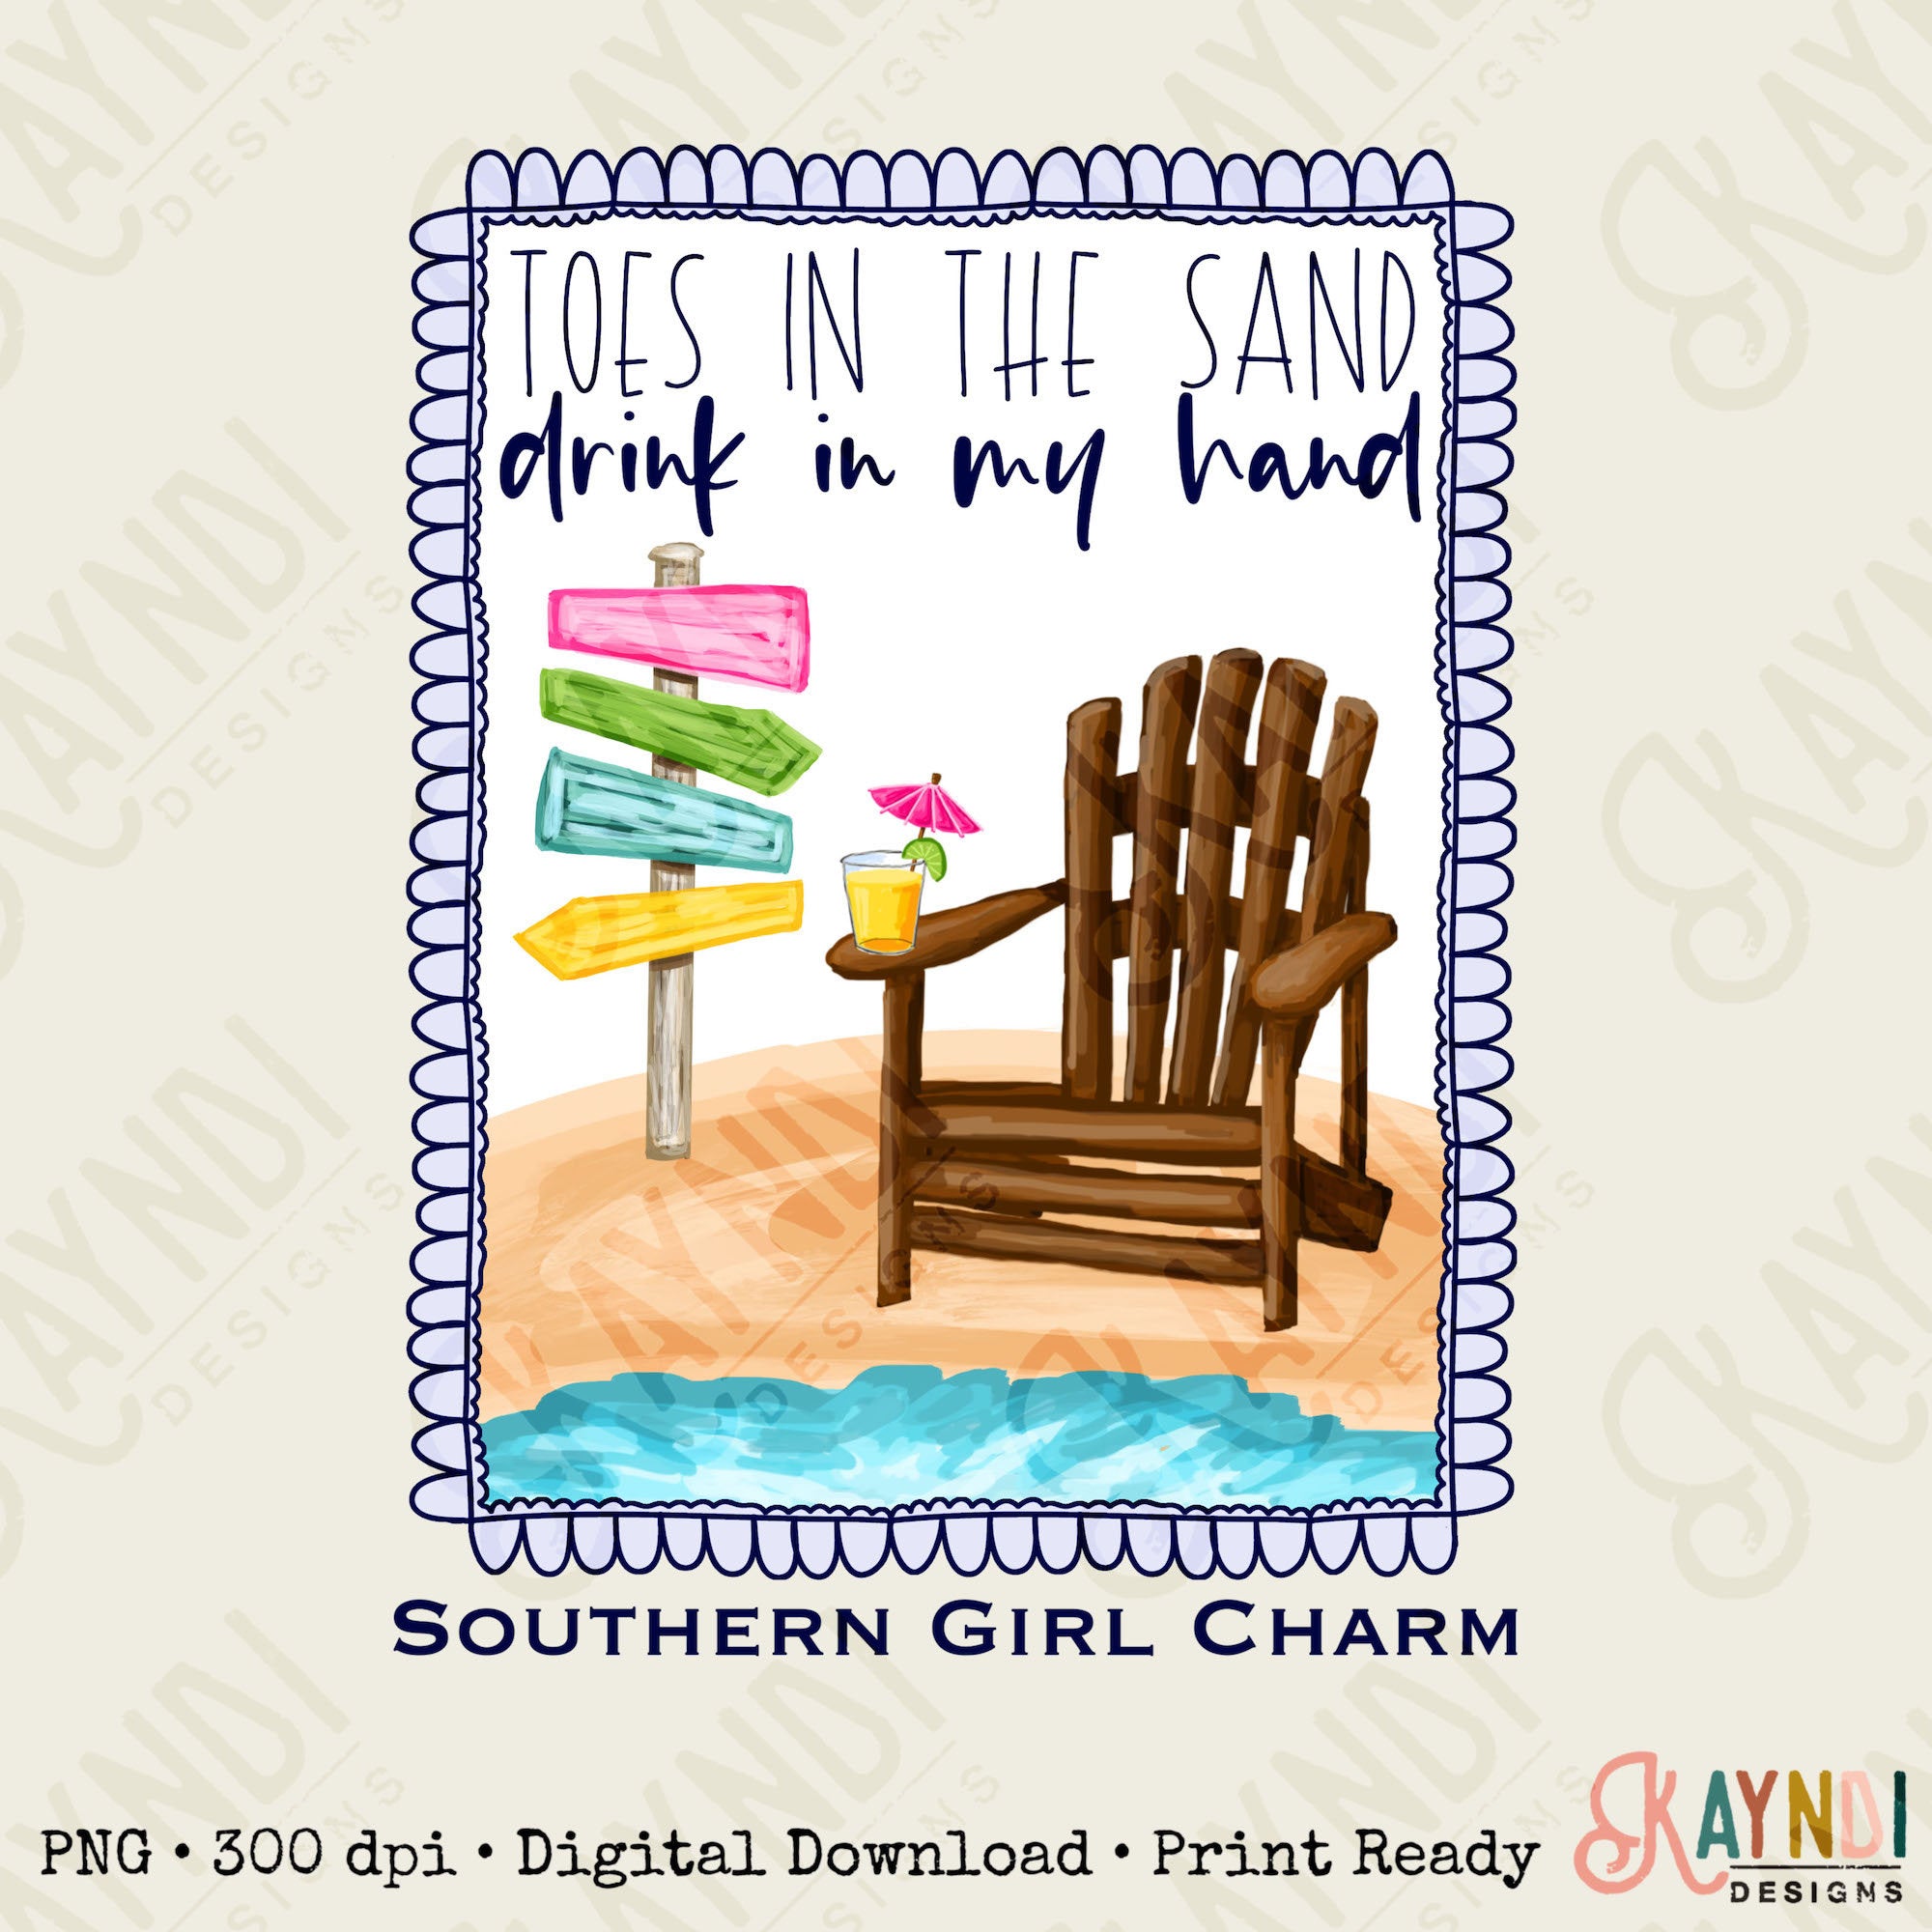 Southern Girl Charm Toes in the Sand Drink in my Hand Sublimation Design PNG Digital Download Printable Southern Prep Preppy Girly Beach